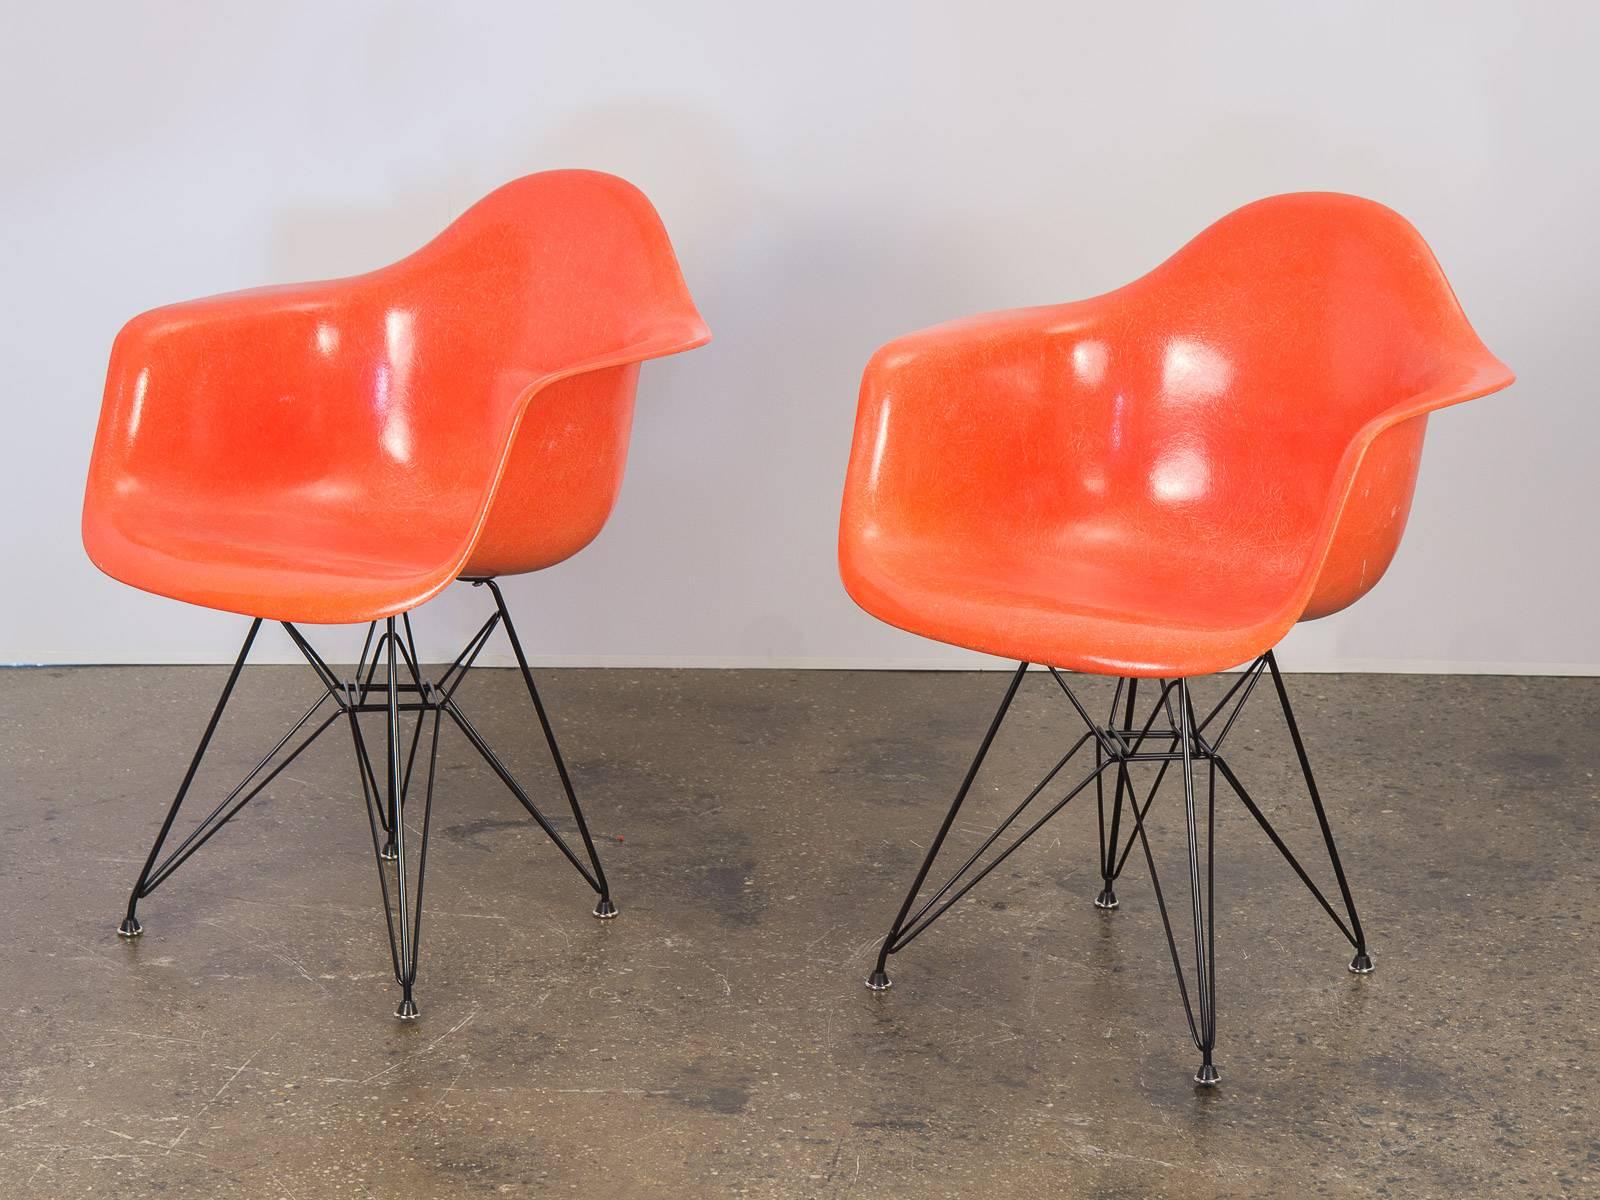 Pair of Classic Charles and Ray Eames 1960s molded fiberglass armchairs in orange on a reissued black Eiffel base for Herman Miller. Original finish with distinct thread texture, in excellent condition with clean edges. Herman Miller stamp on the